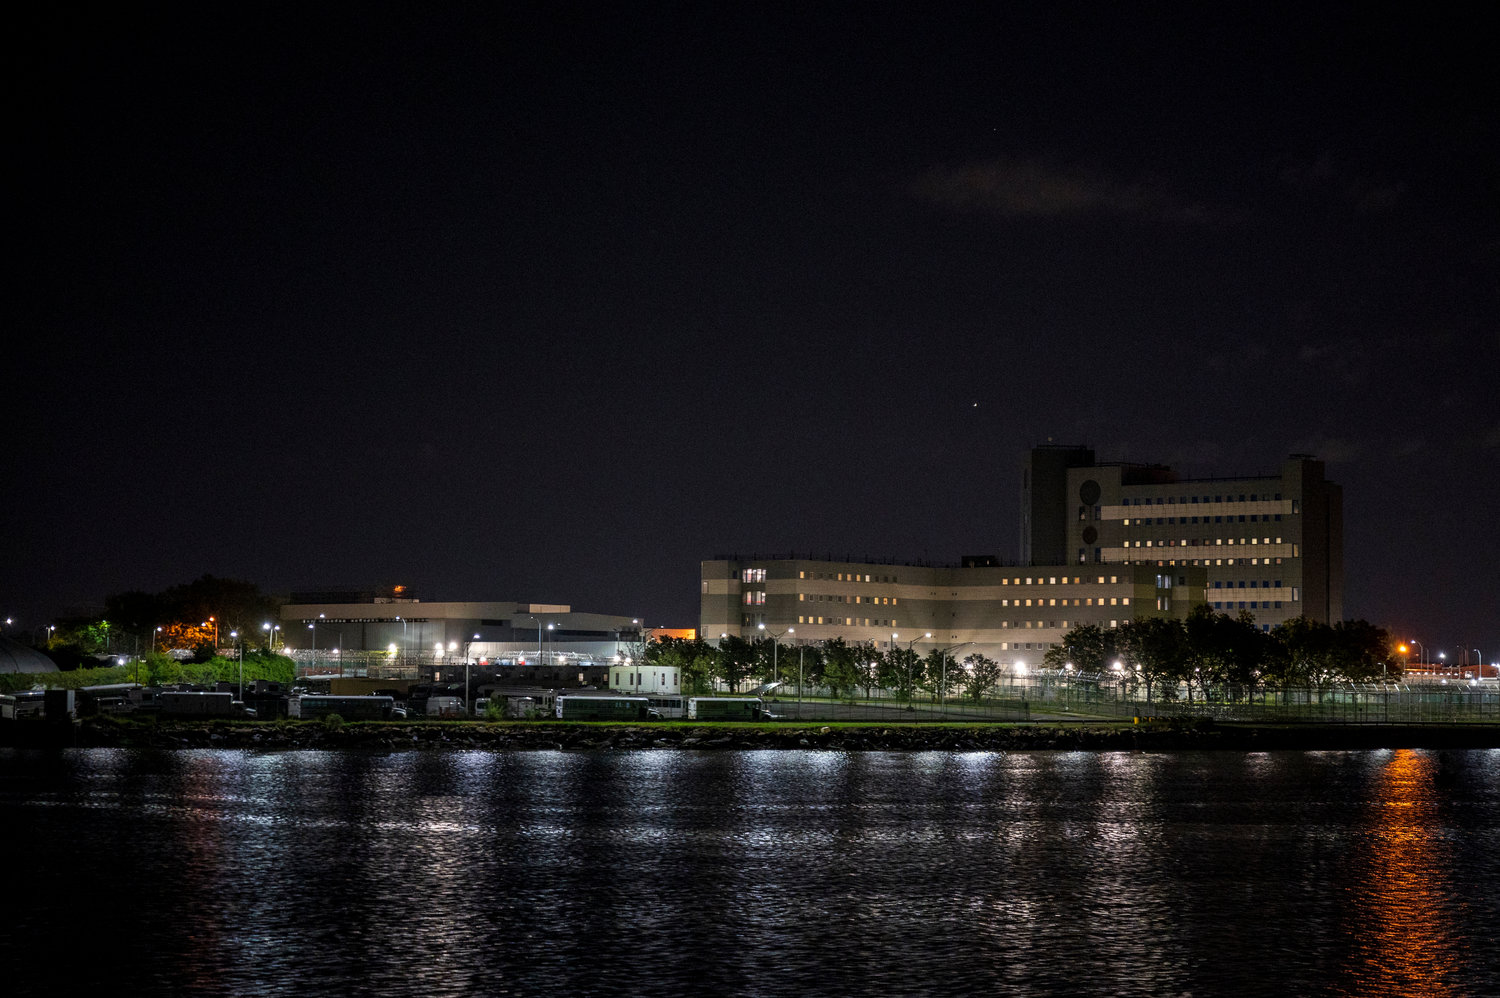 The massive jail facility of Rikers Island looms across the East River, even from Barretto Point Park. Mayor Bill de Blasio has pushed to spend billions of dollars to close the facility, but what’s happening behind those walls in the meantime?